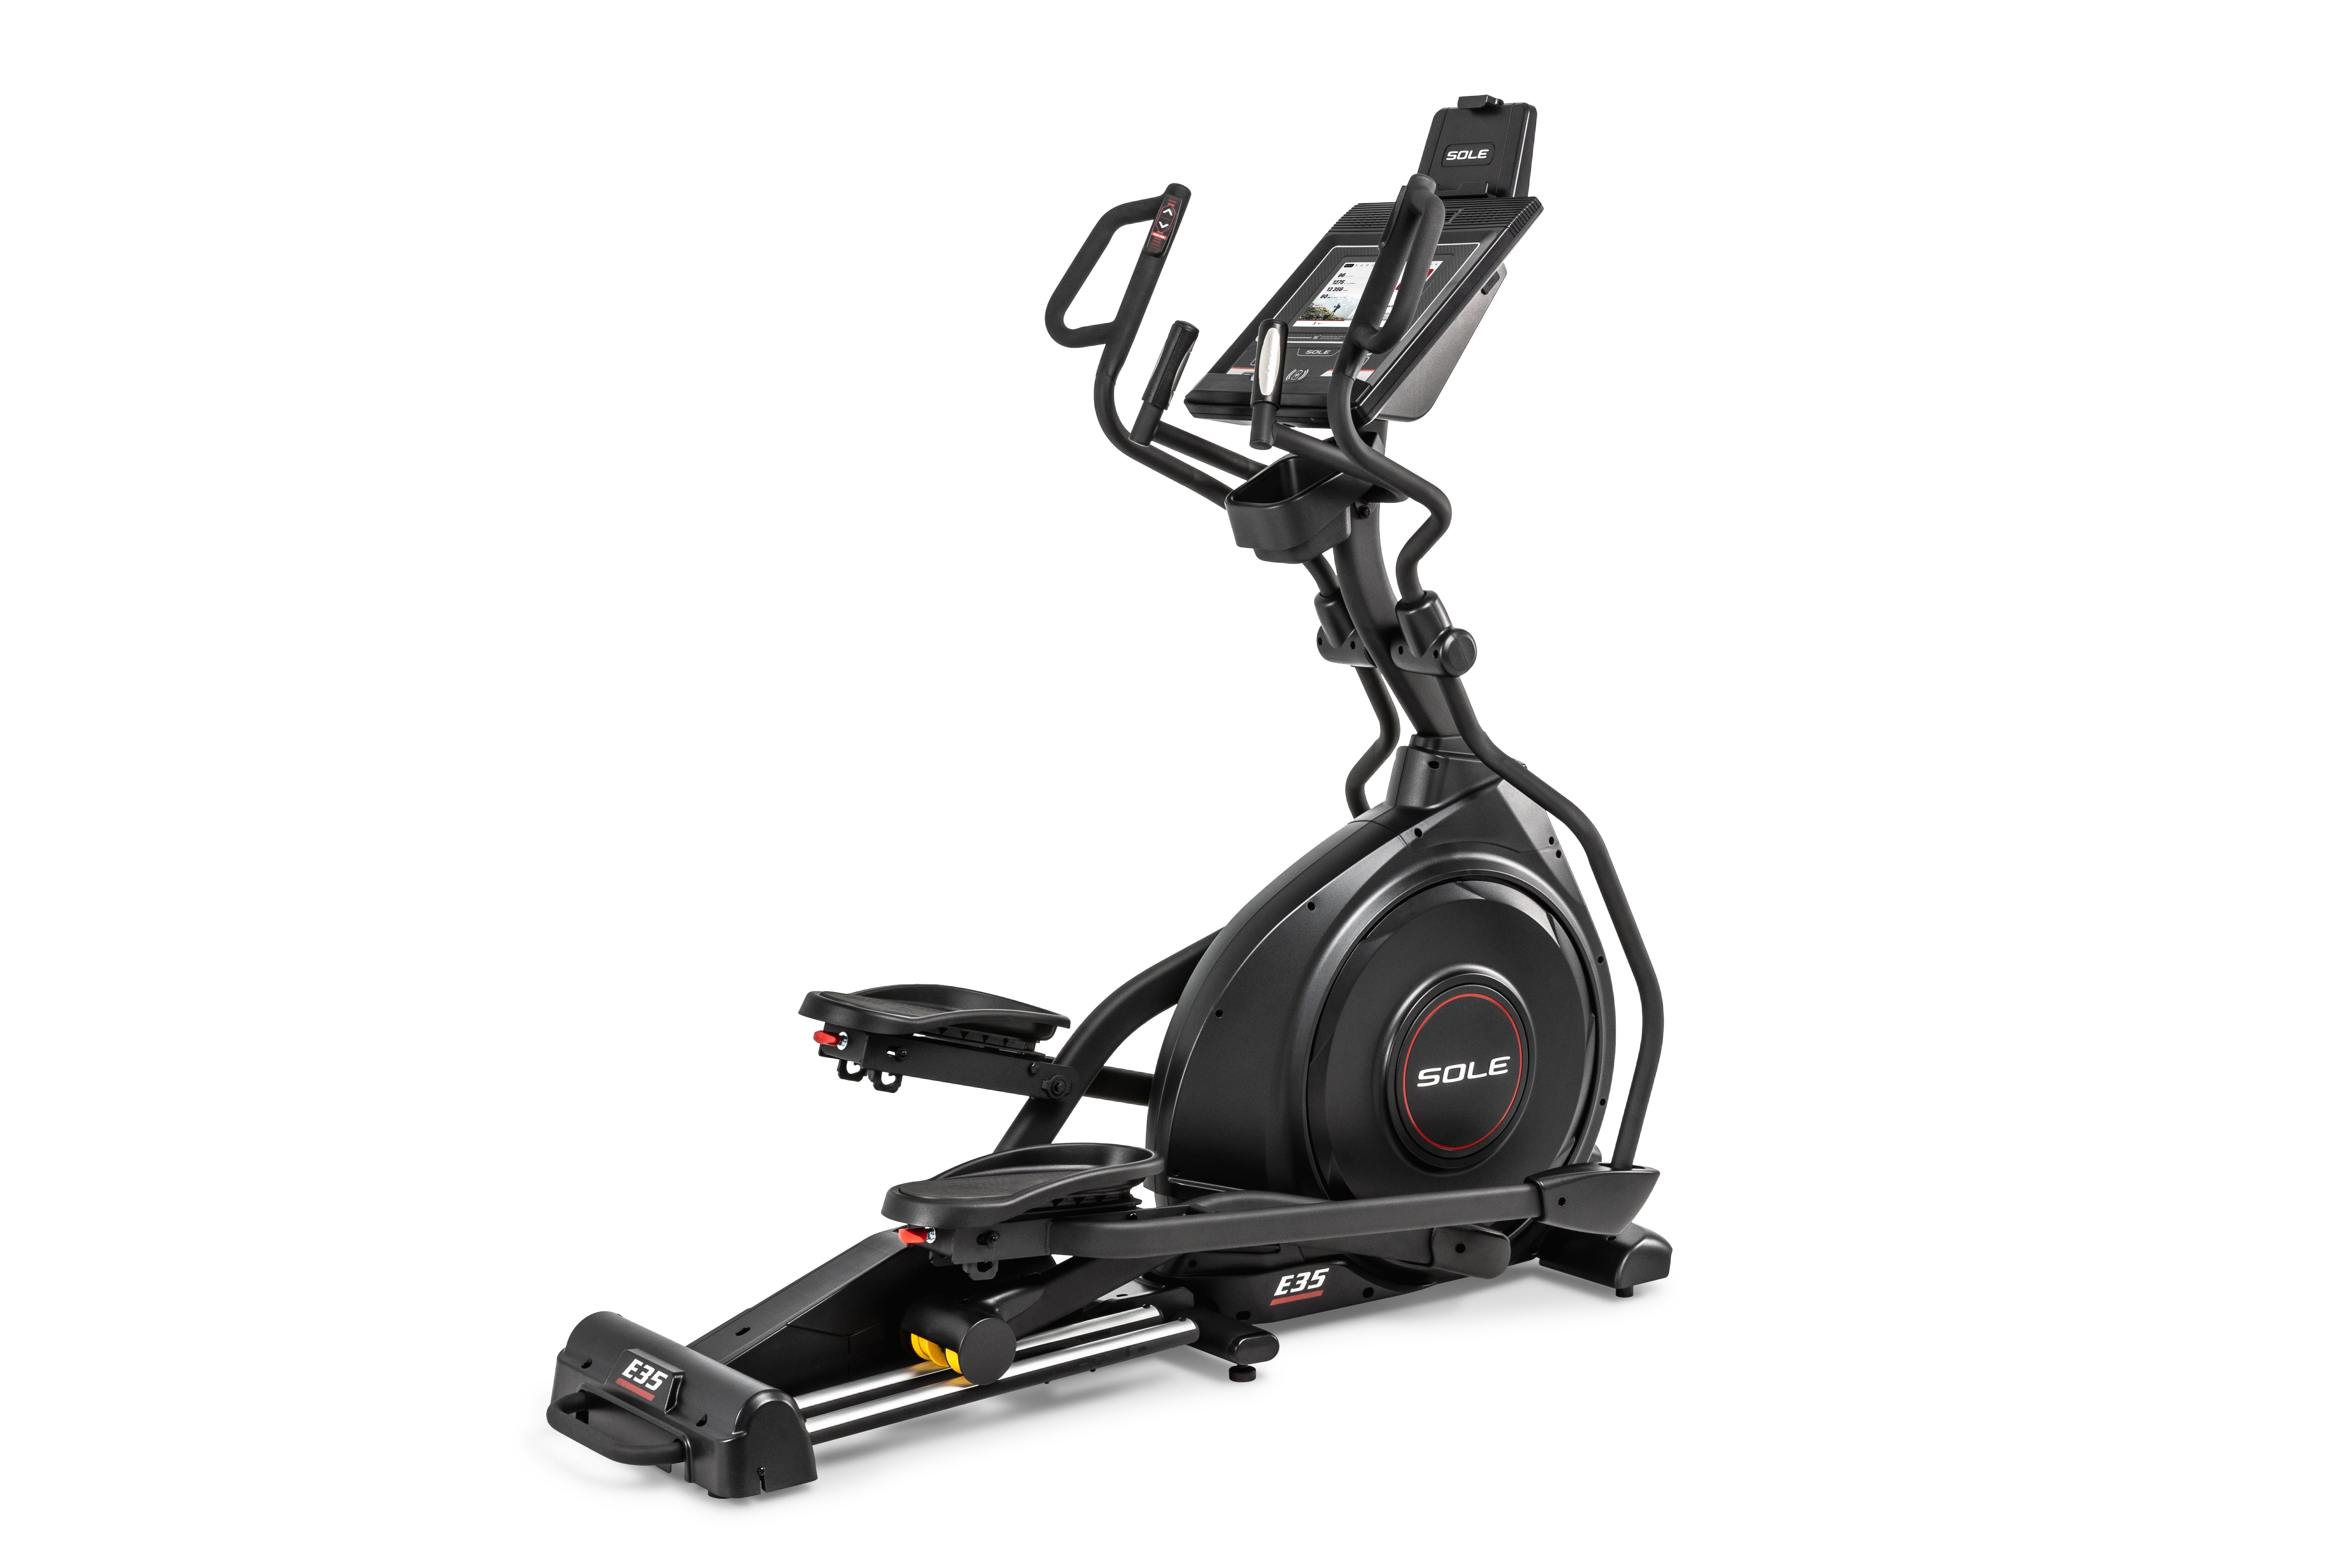 Sole E35 elliptical machine, featuring its digital display panel, dual handlebars, black frame, prominent 'SOLE' branding on the flywheel, and 'E35' logo on the base and foot pedals.